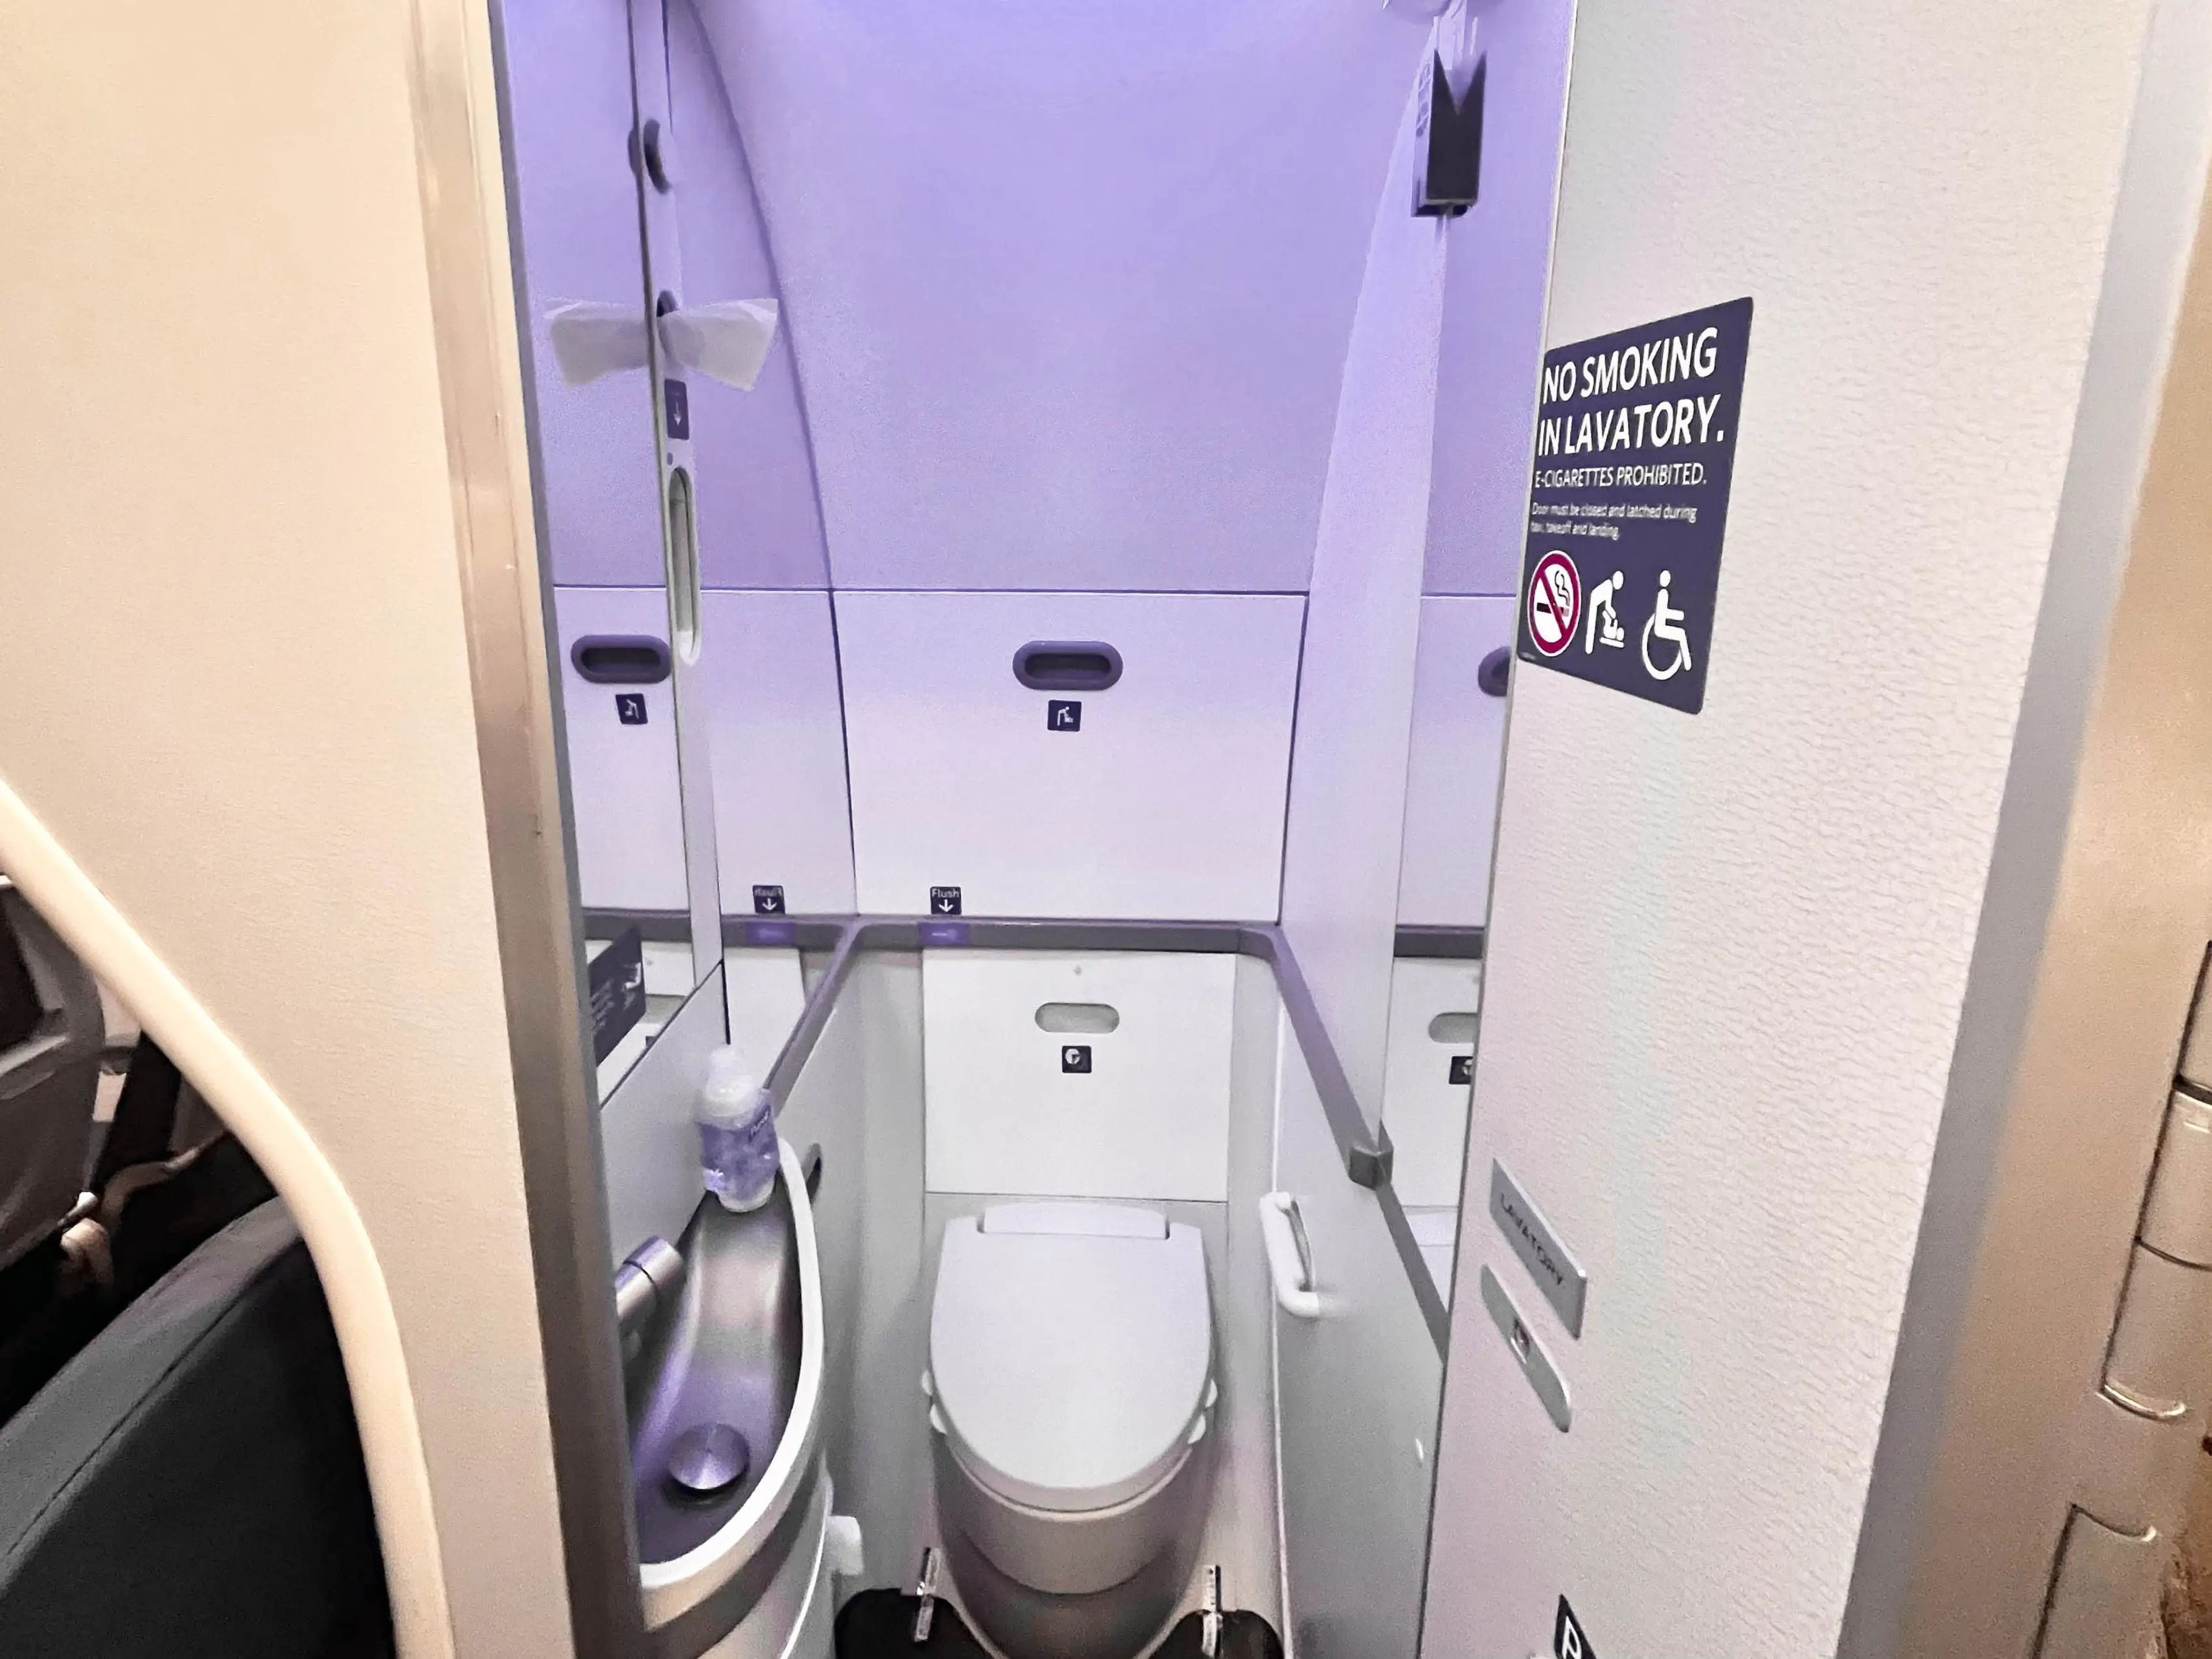 An airplane bathroom, which includes a toilet and sink, with the door open. A sign on the door reads "No smoking in lavatory."